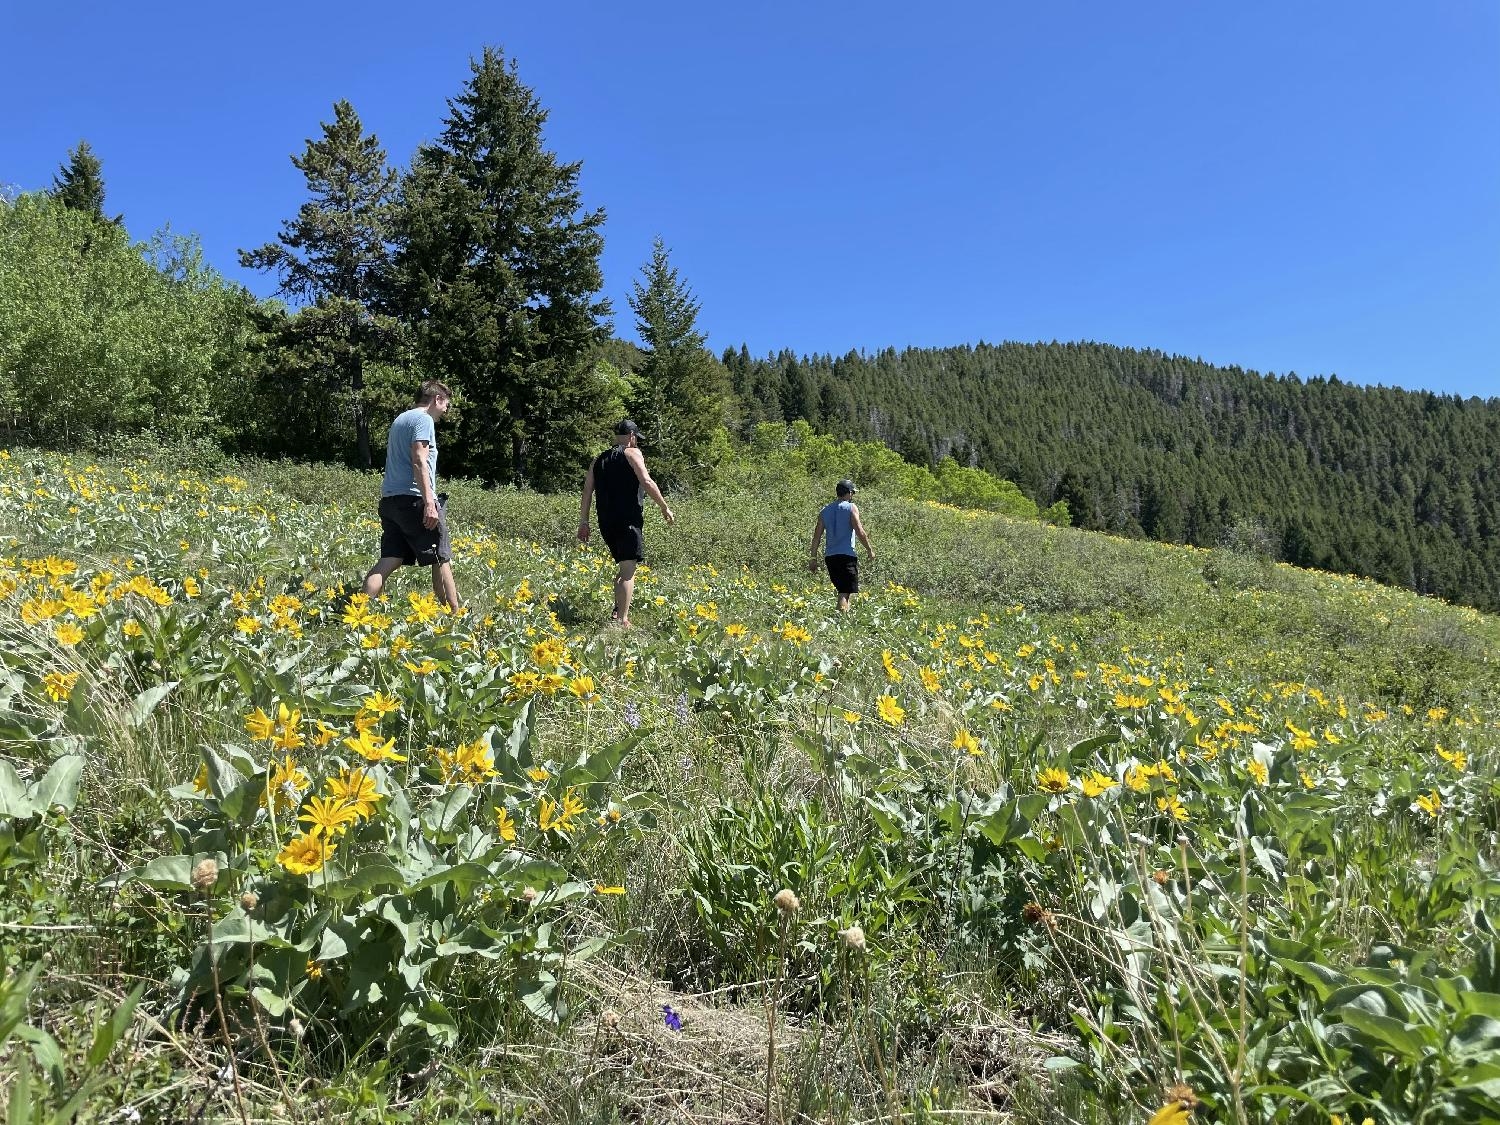 photo from our leadership retreat hike in Bozeman, MT